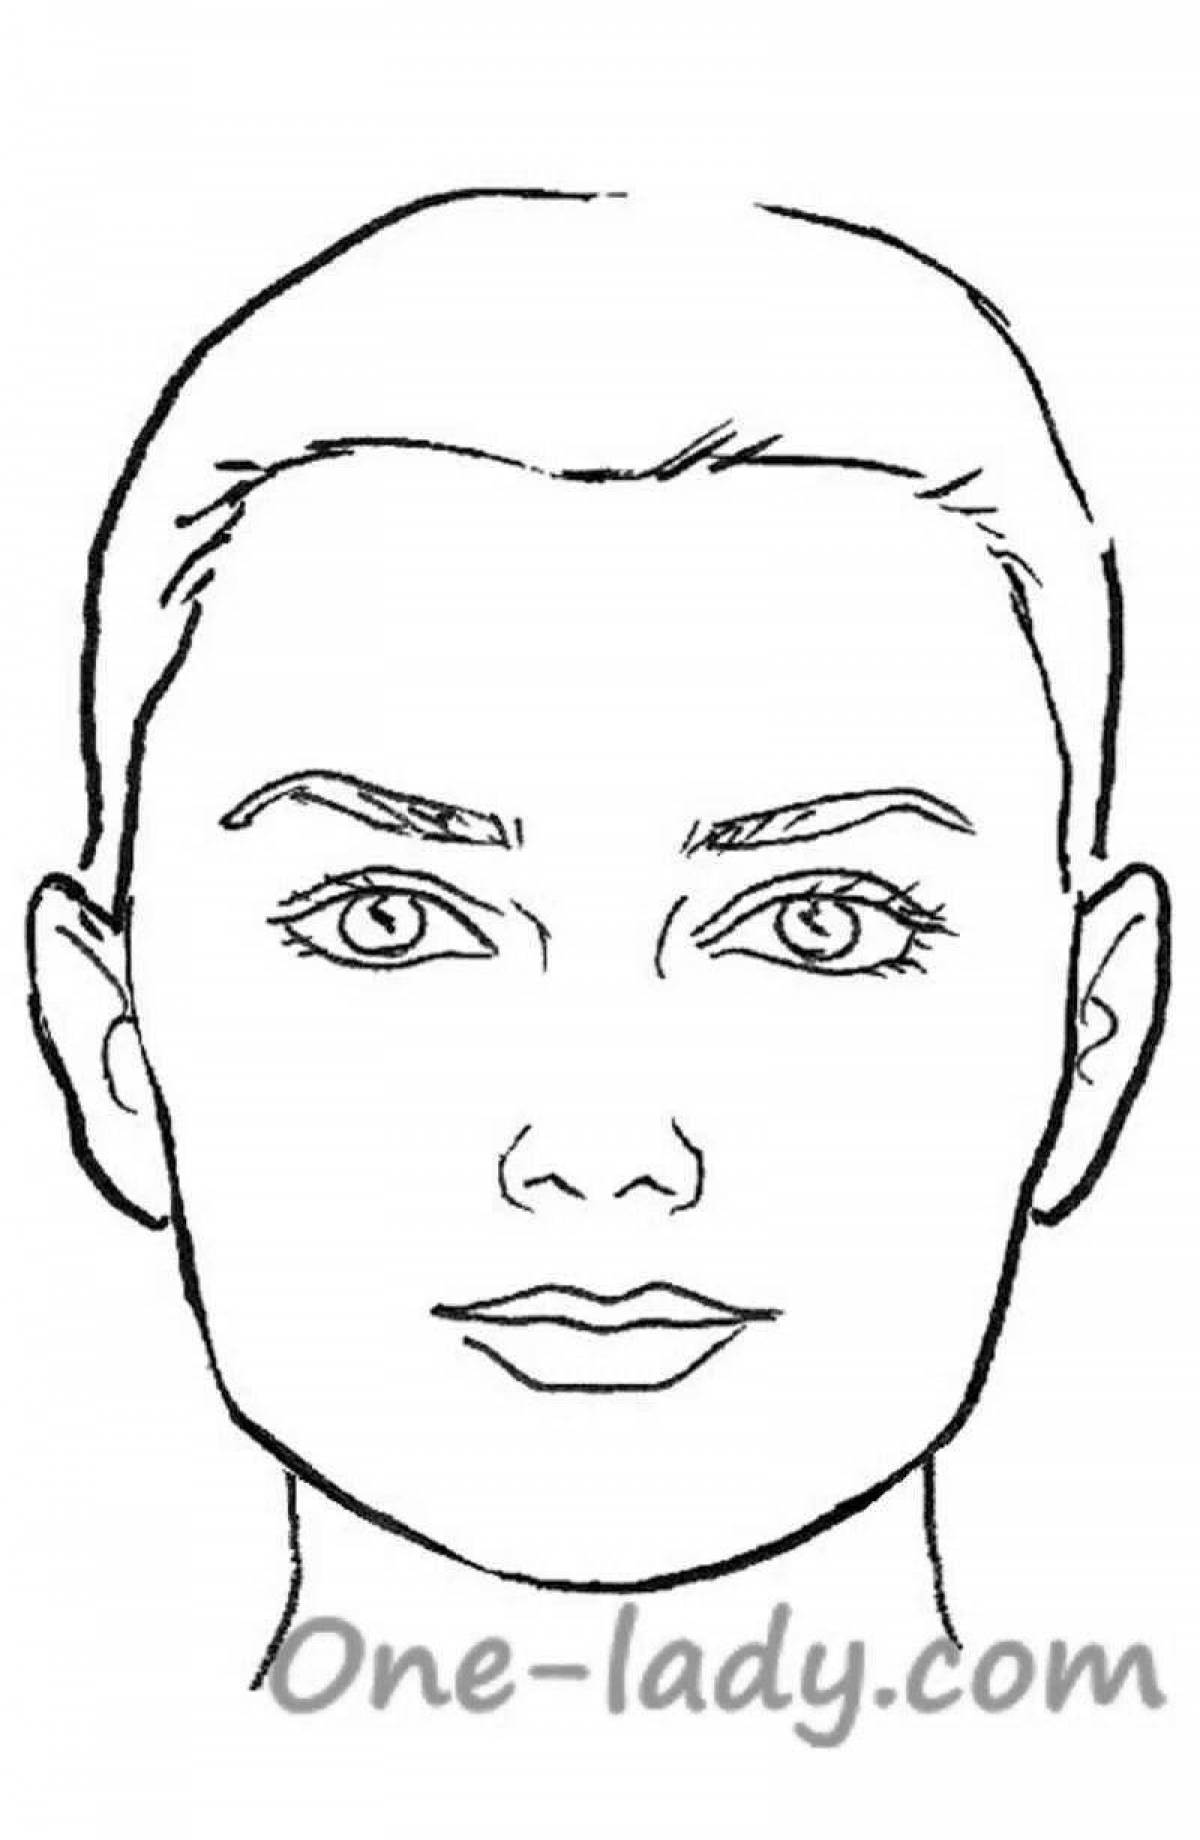 Living human face coloring page